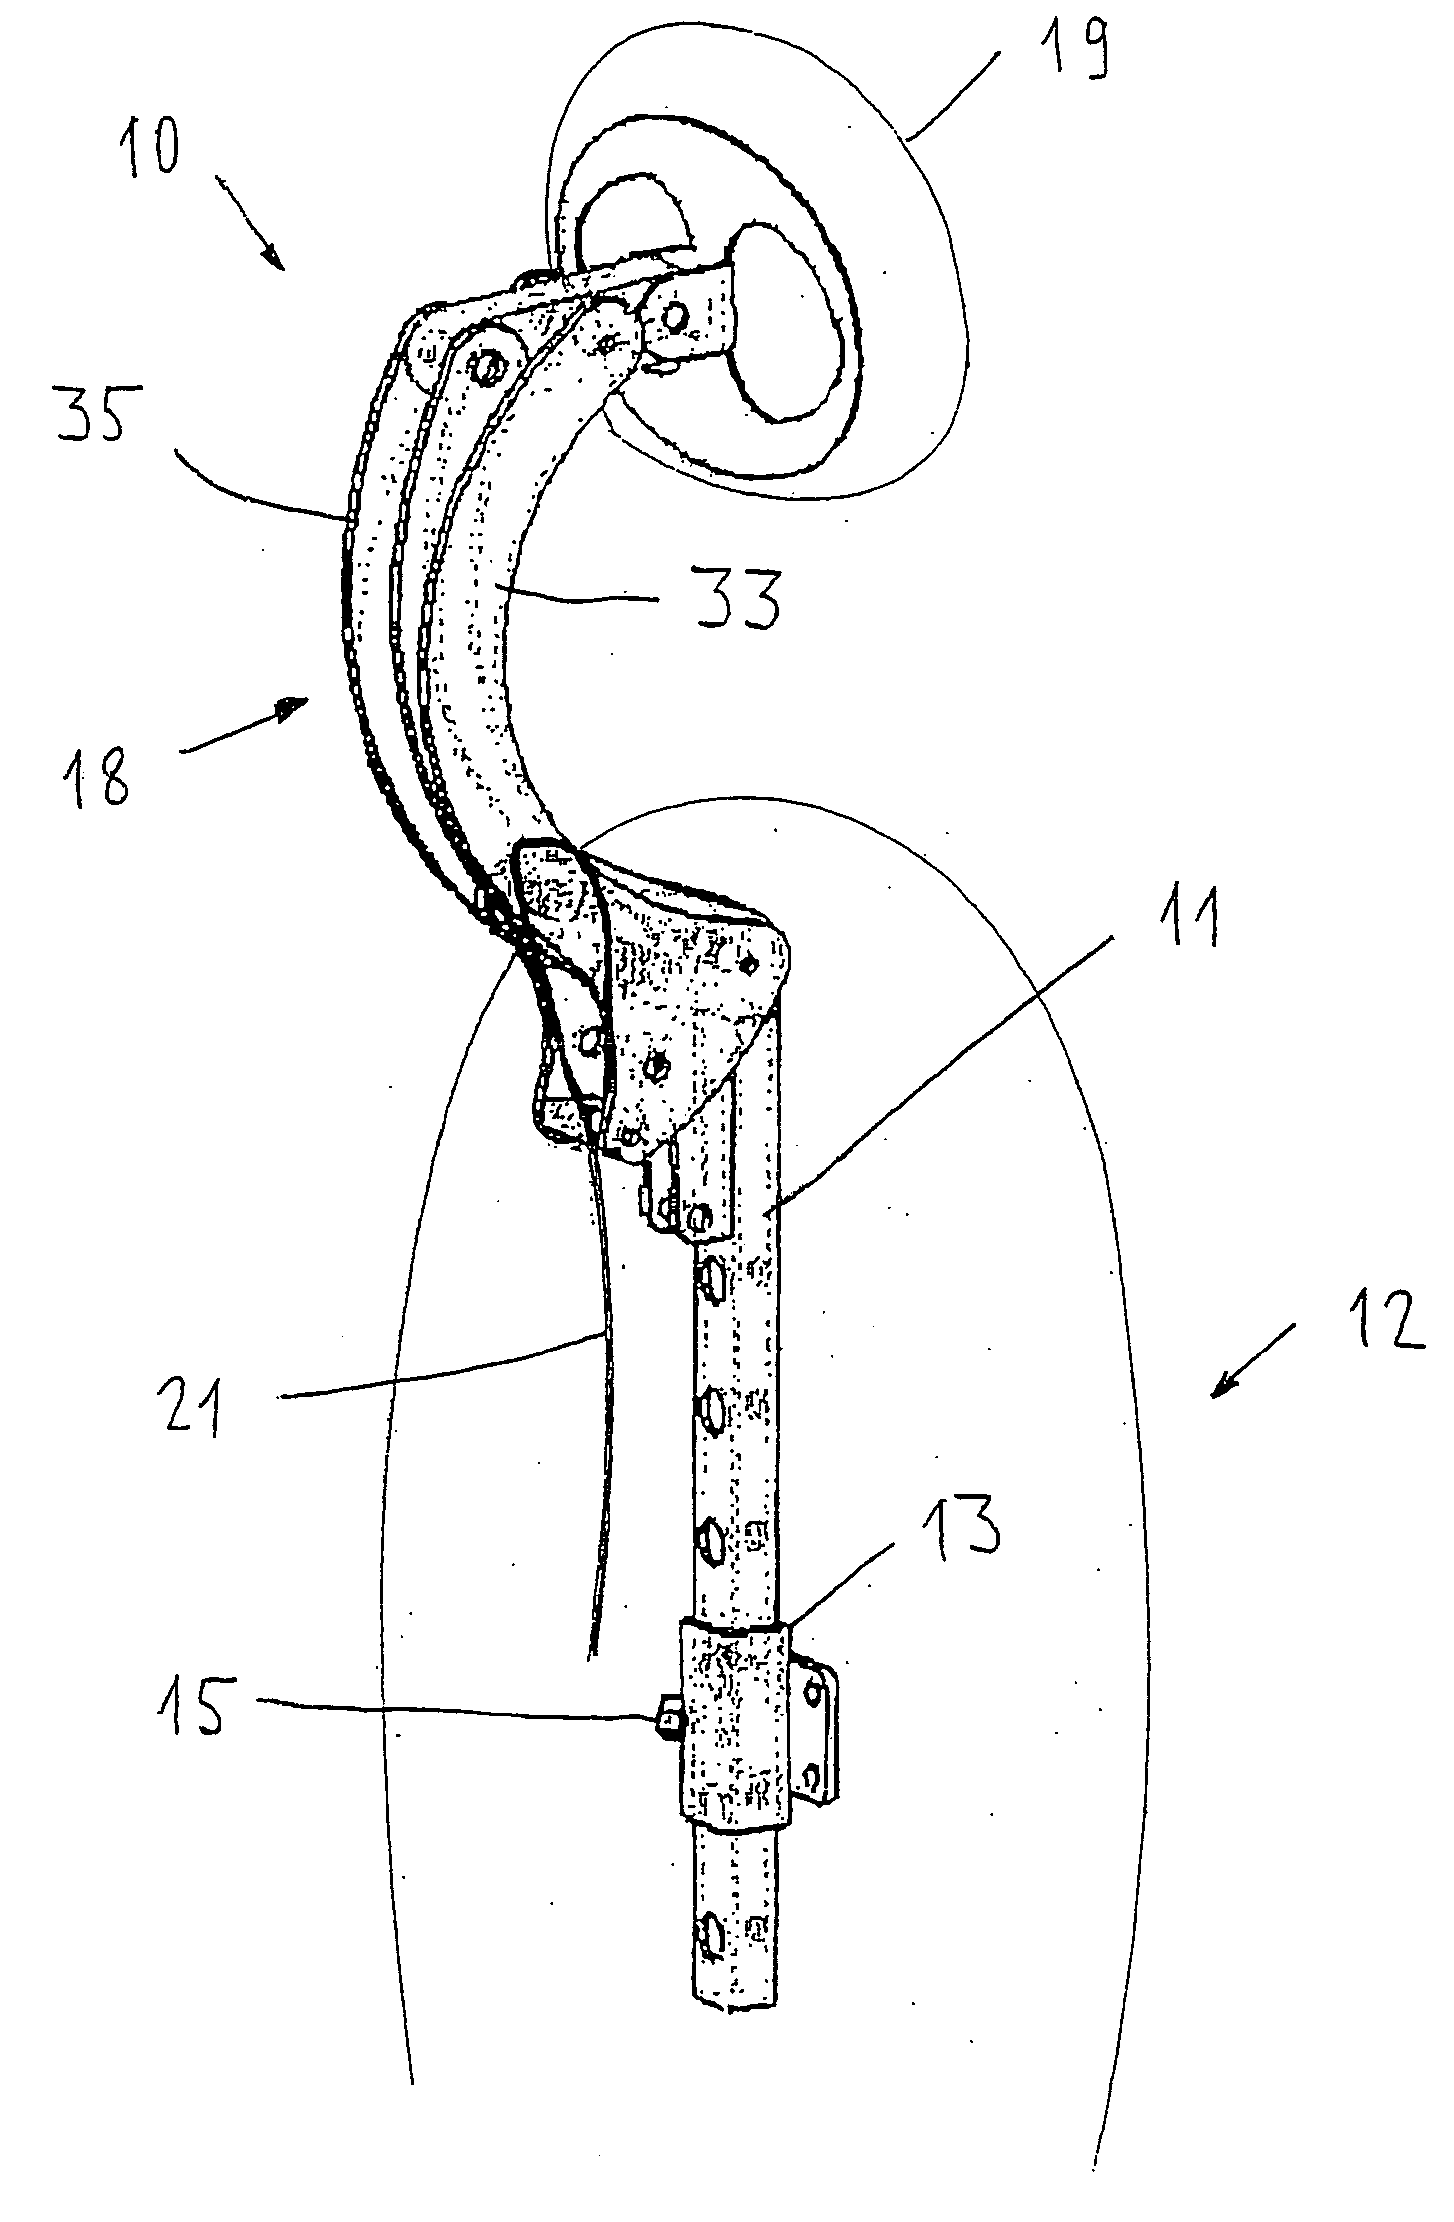 Adjustable head support for a chair